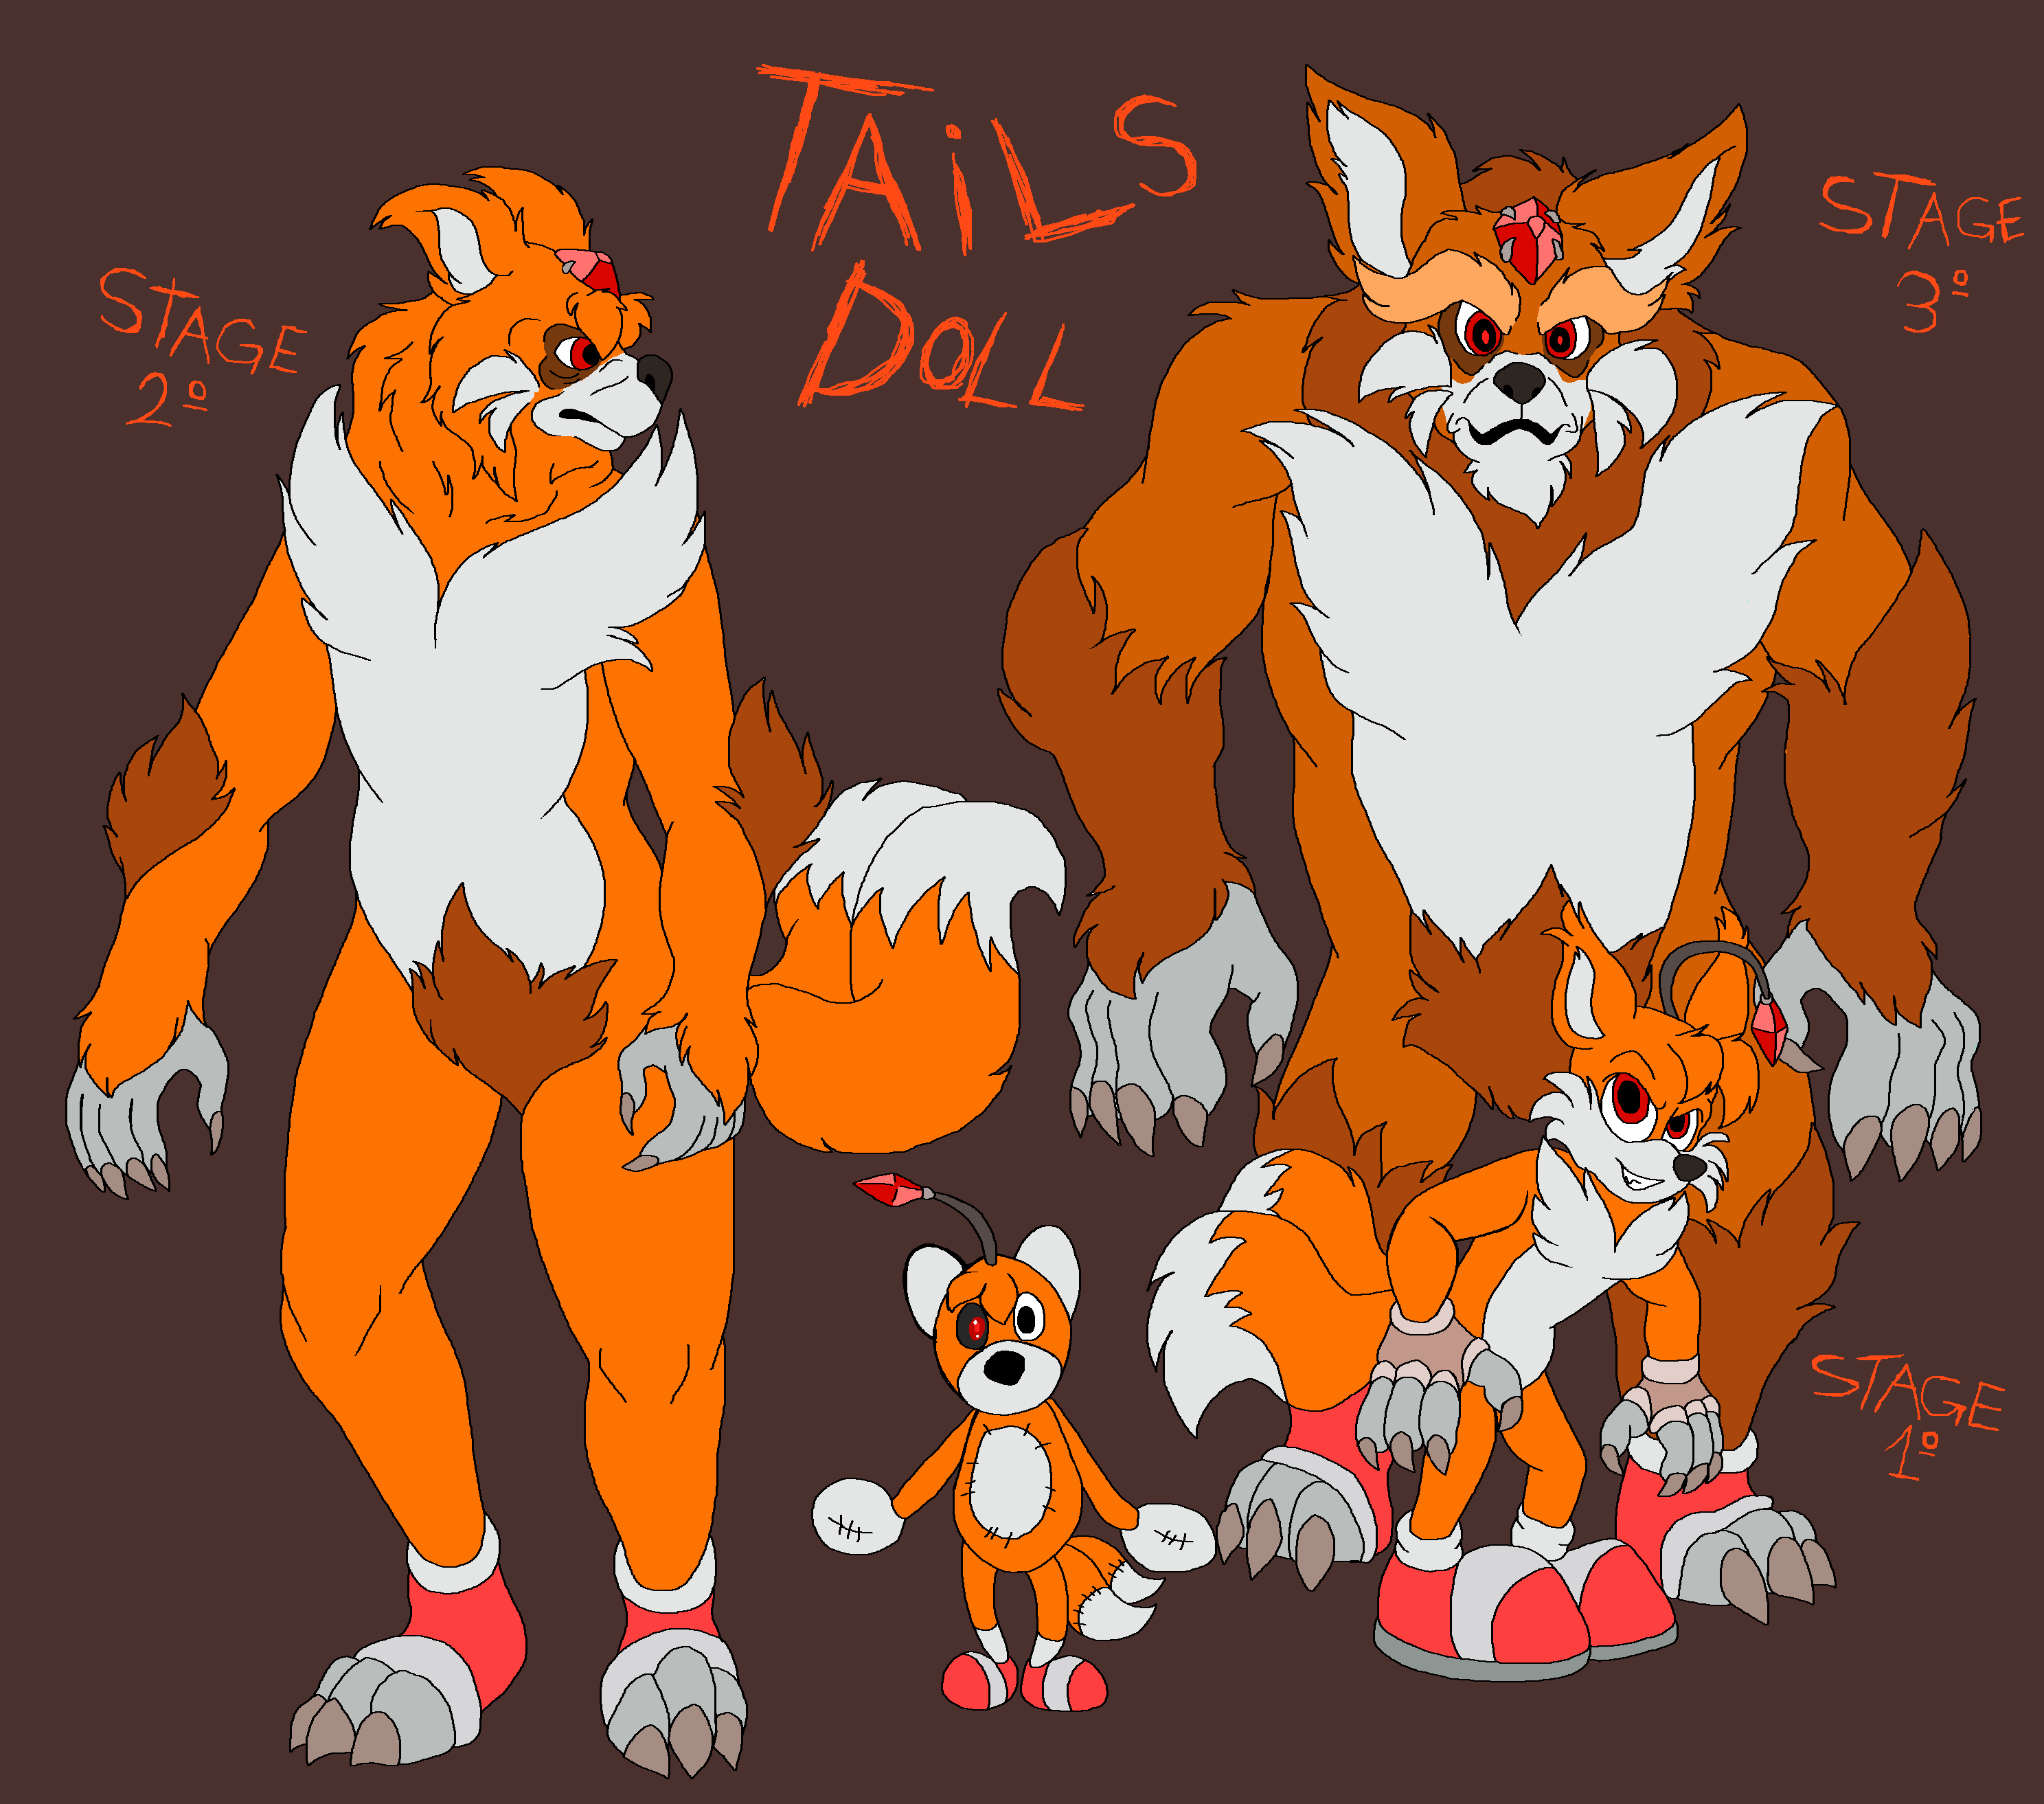 Tails Doll And His Stages by Felicity-Wolf on DeviantArt